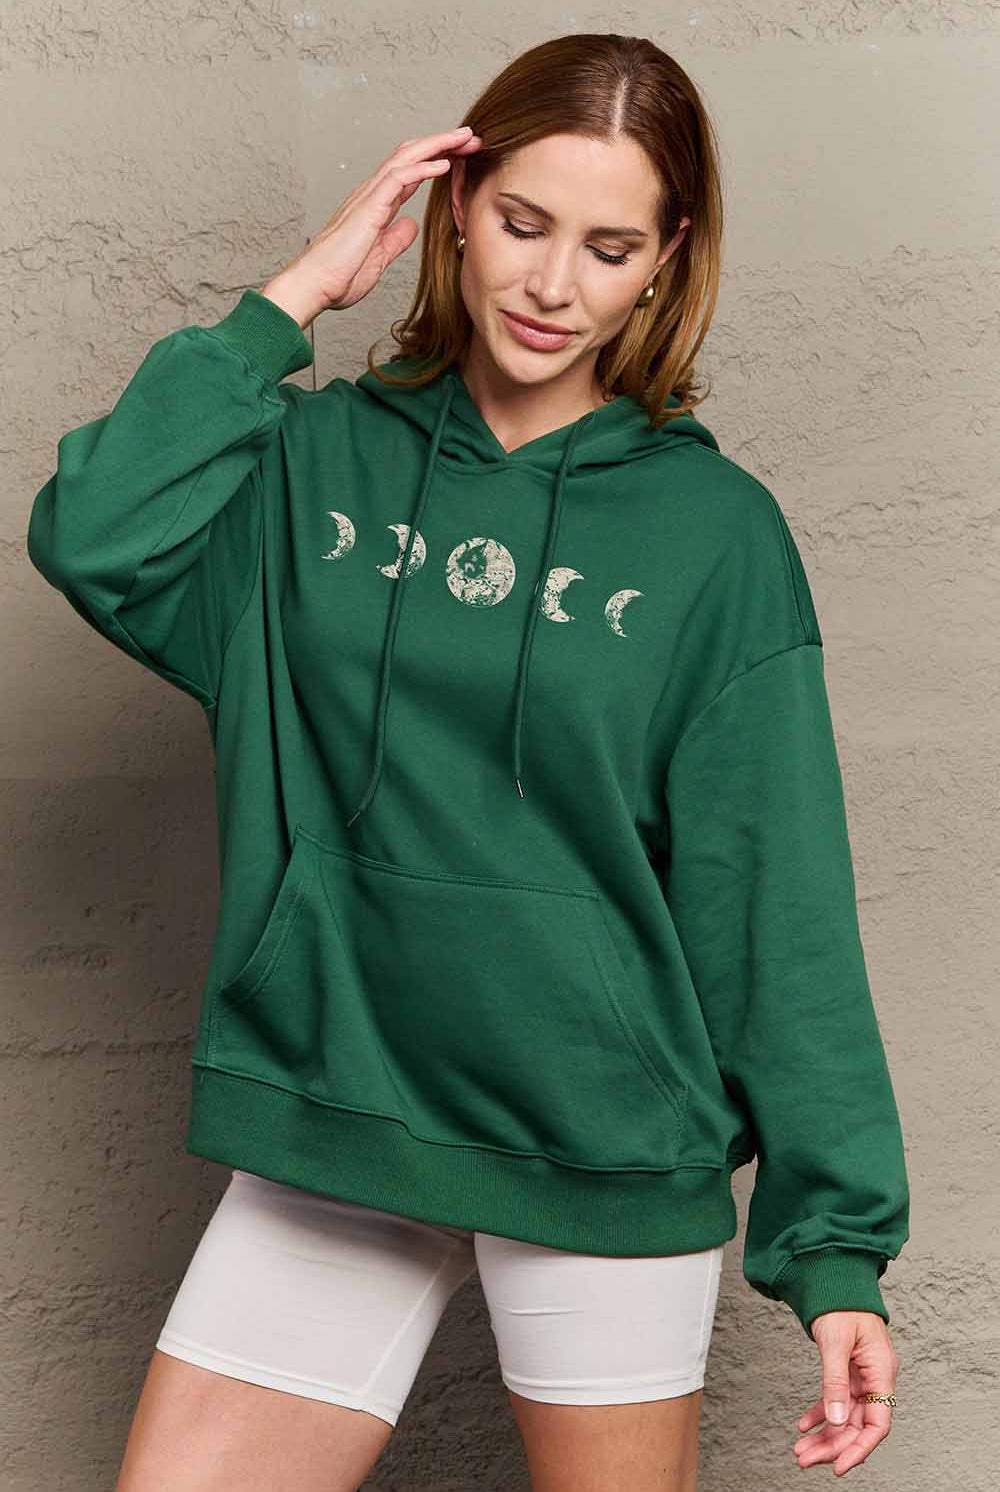 Tan Simply Love Simply Love Full Size Dropped Shoulder Lunar Phase Graphic Hoodie Sweatshirts